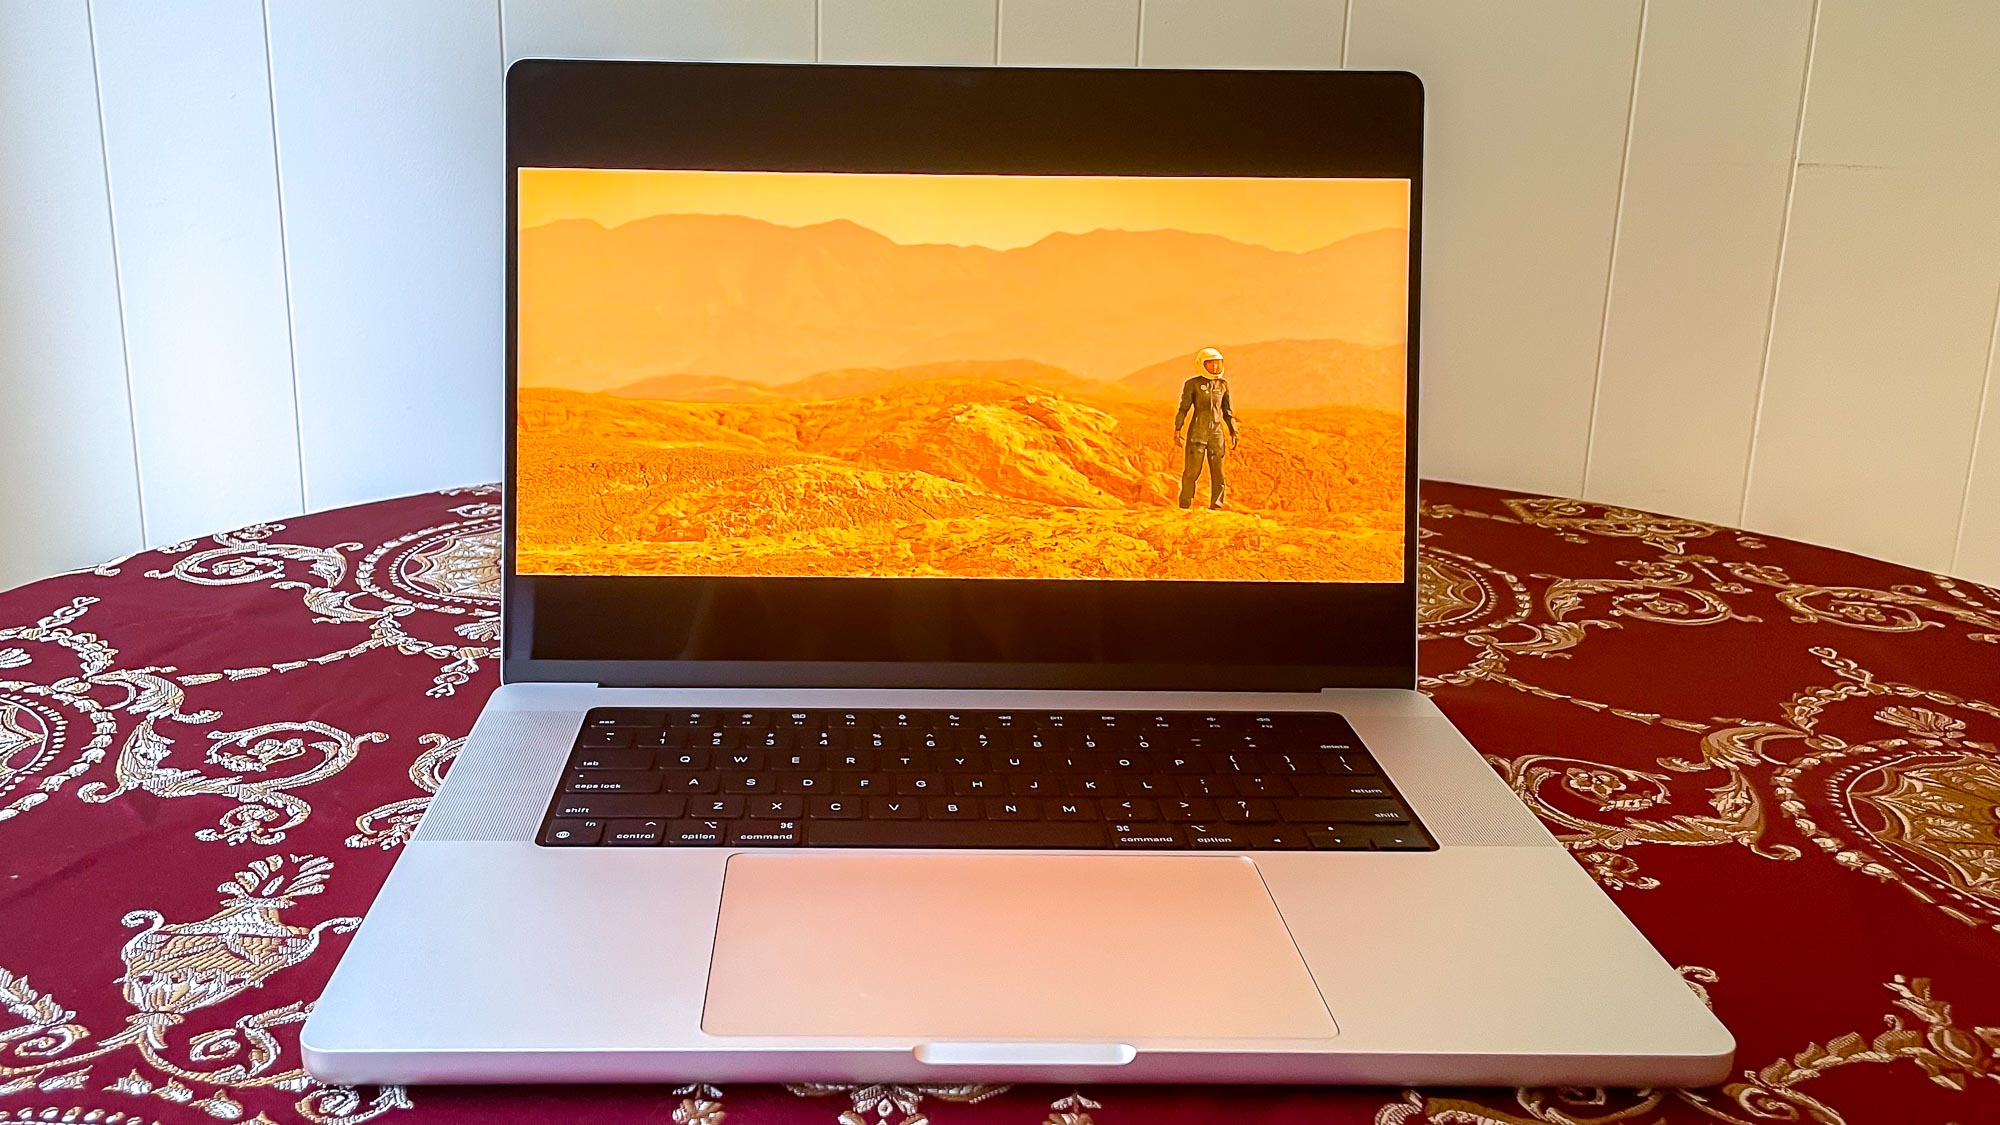 MacBook Pro 2021 (16-inch) on a table showing a short movie